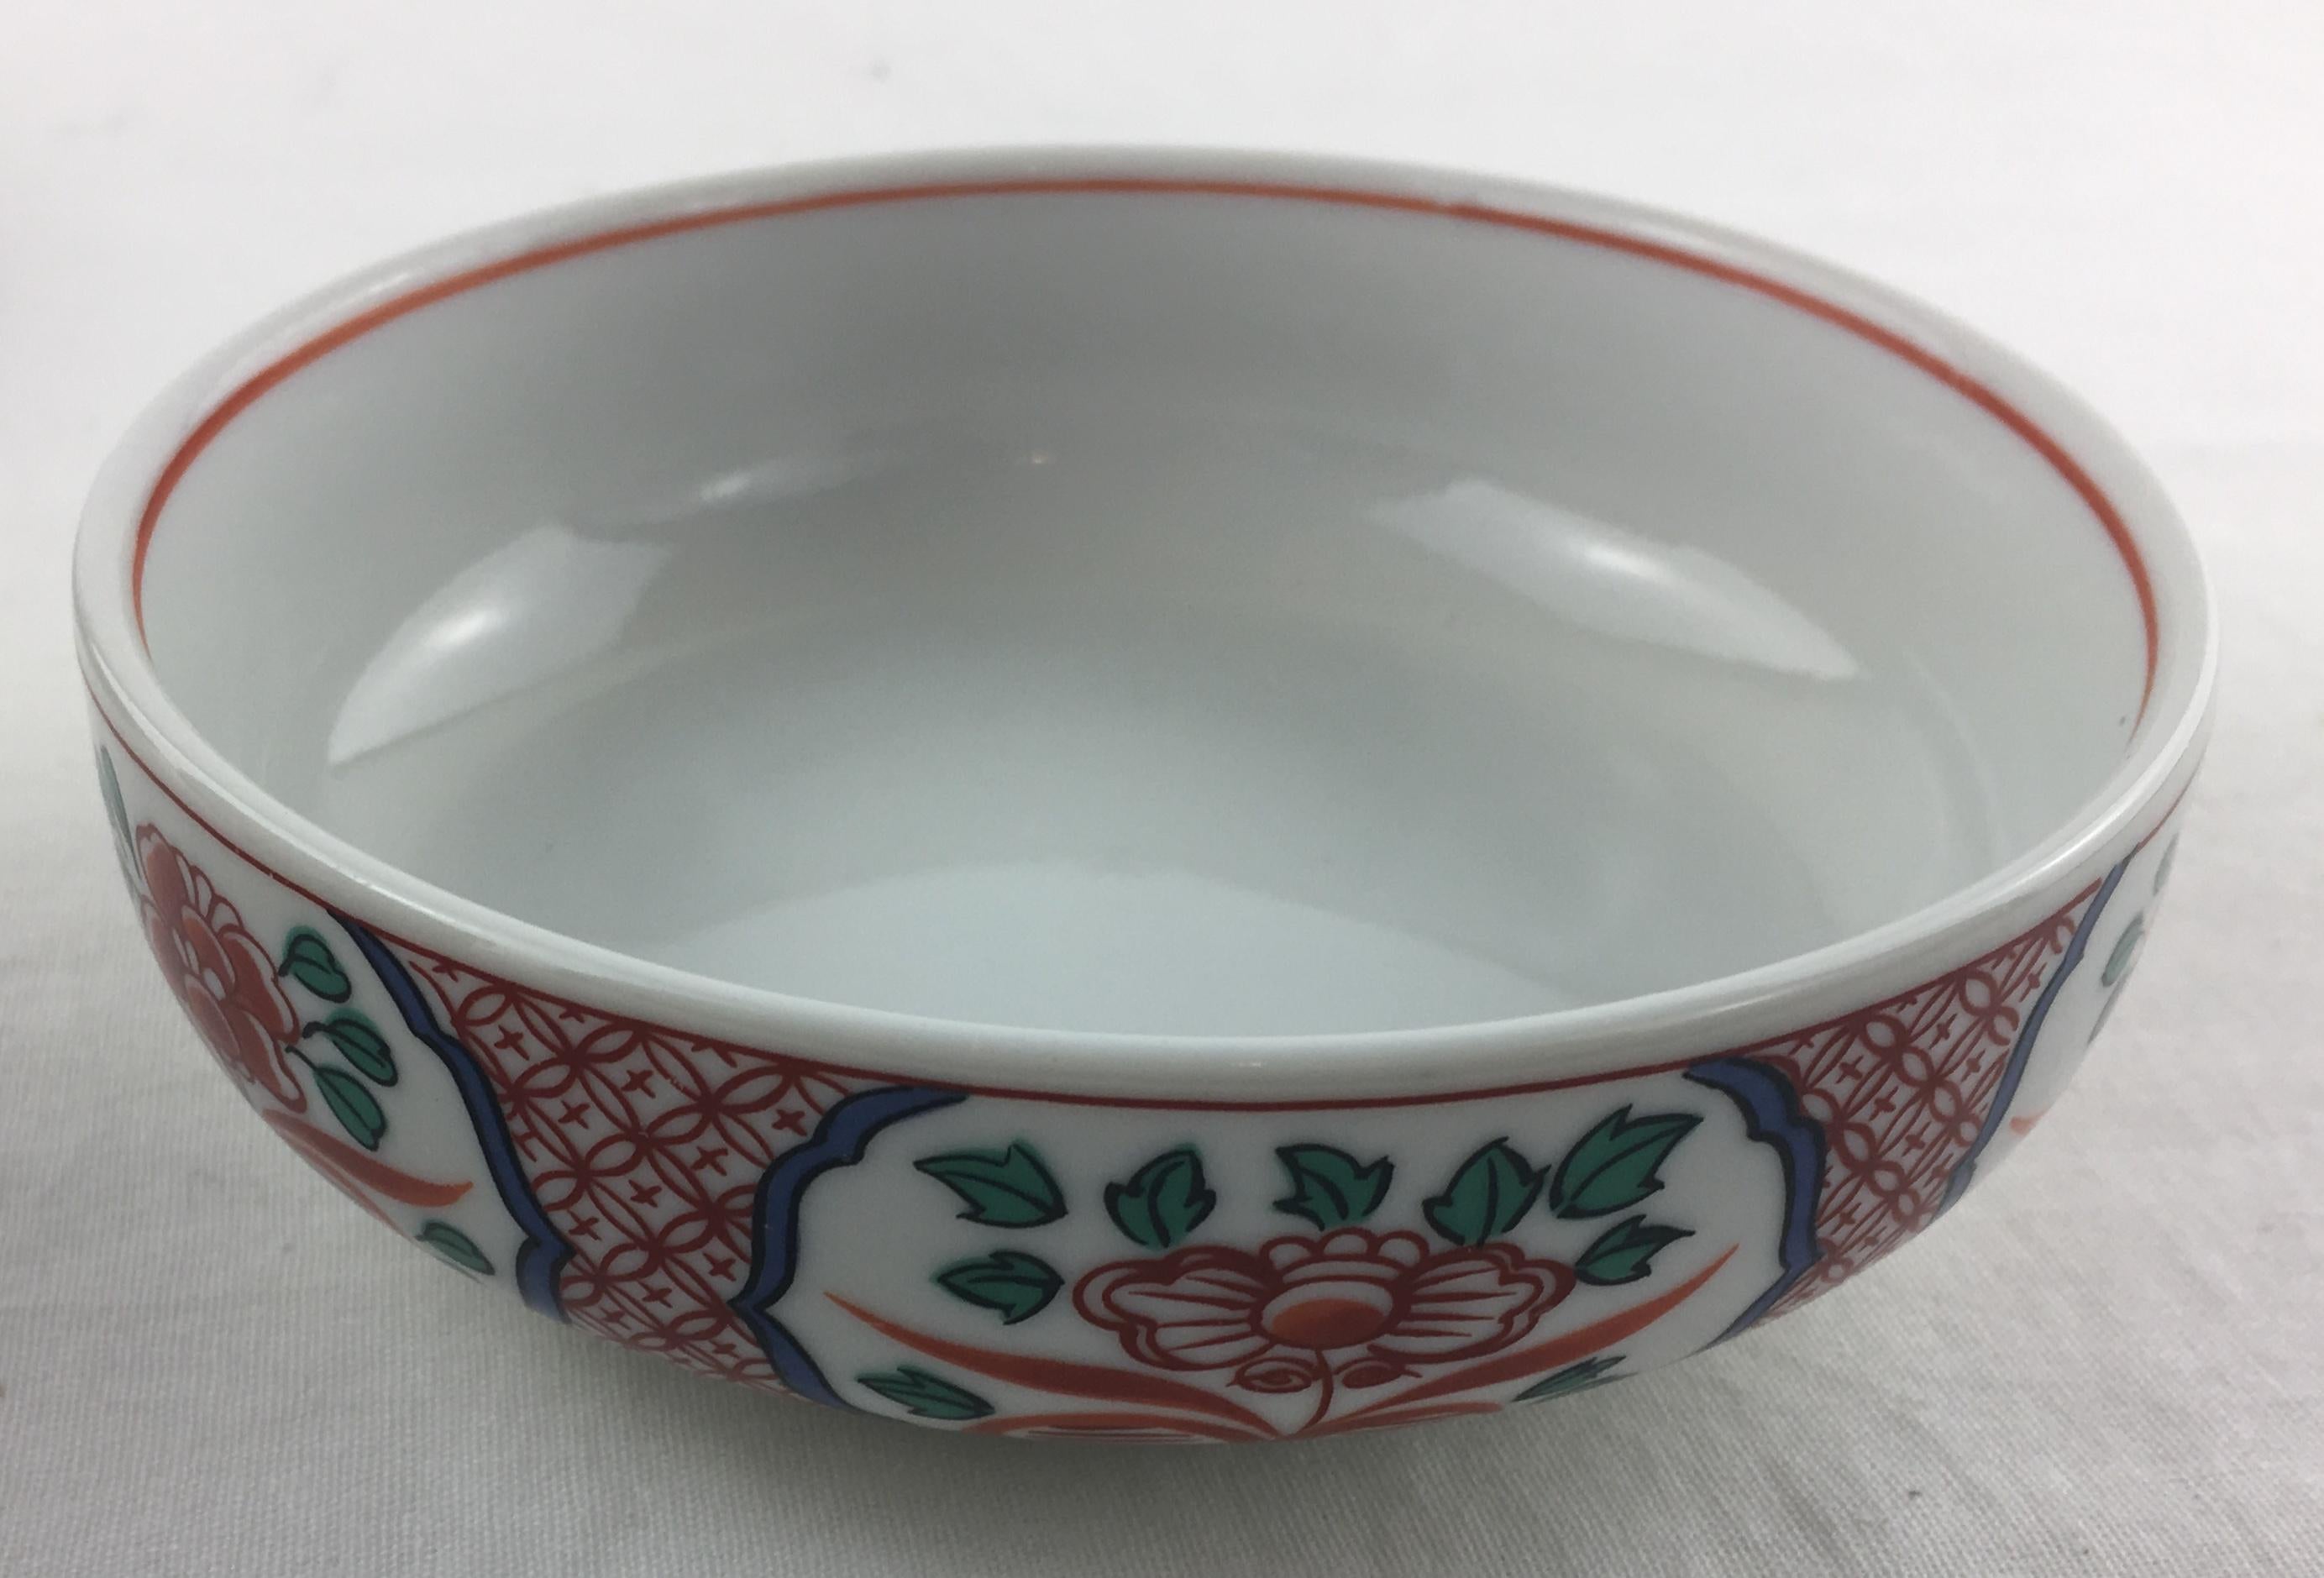 Collection of five matching 20th century Japanese porcelain bowls, hand painted with delicate traditional Japanese details. A beautiful set of Japanese, collectable porcelain that remain in perfect structural condition. No cracks, no chips.